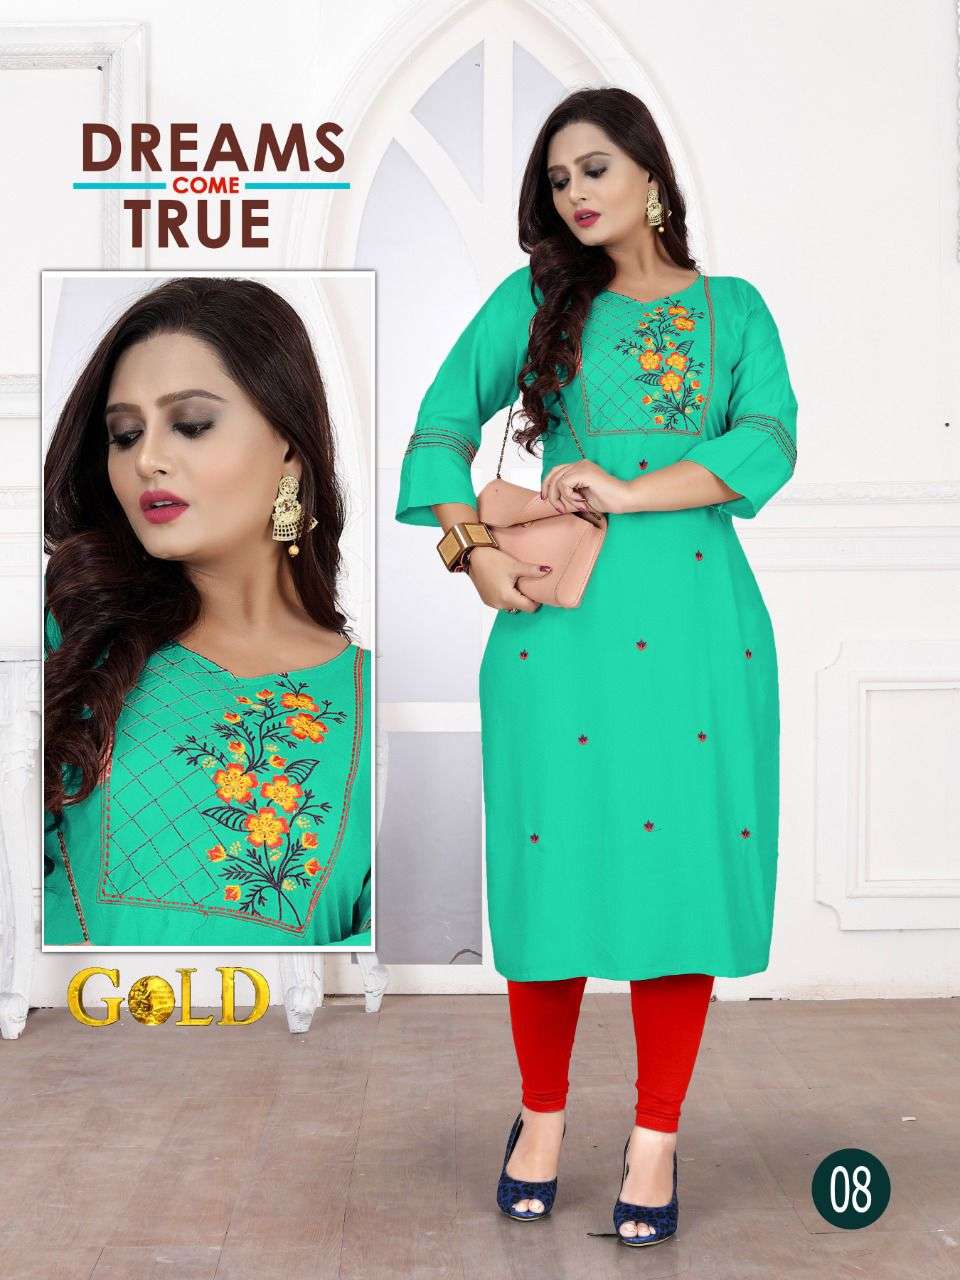 GOLD VOL-4 BY AAGYA 01 TO 08 SERIES DESIGNER STYLISH FANCY COLORFUL BEAUTIFUL PARTY WEAR & ETHNIC WEAR COLLECTION RAYON EMBROIDERY KURTIS AT WHOLESALE PRICE